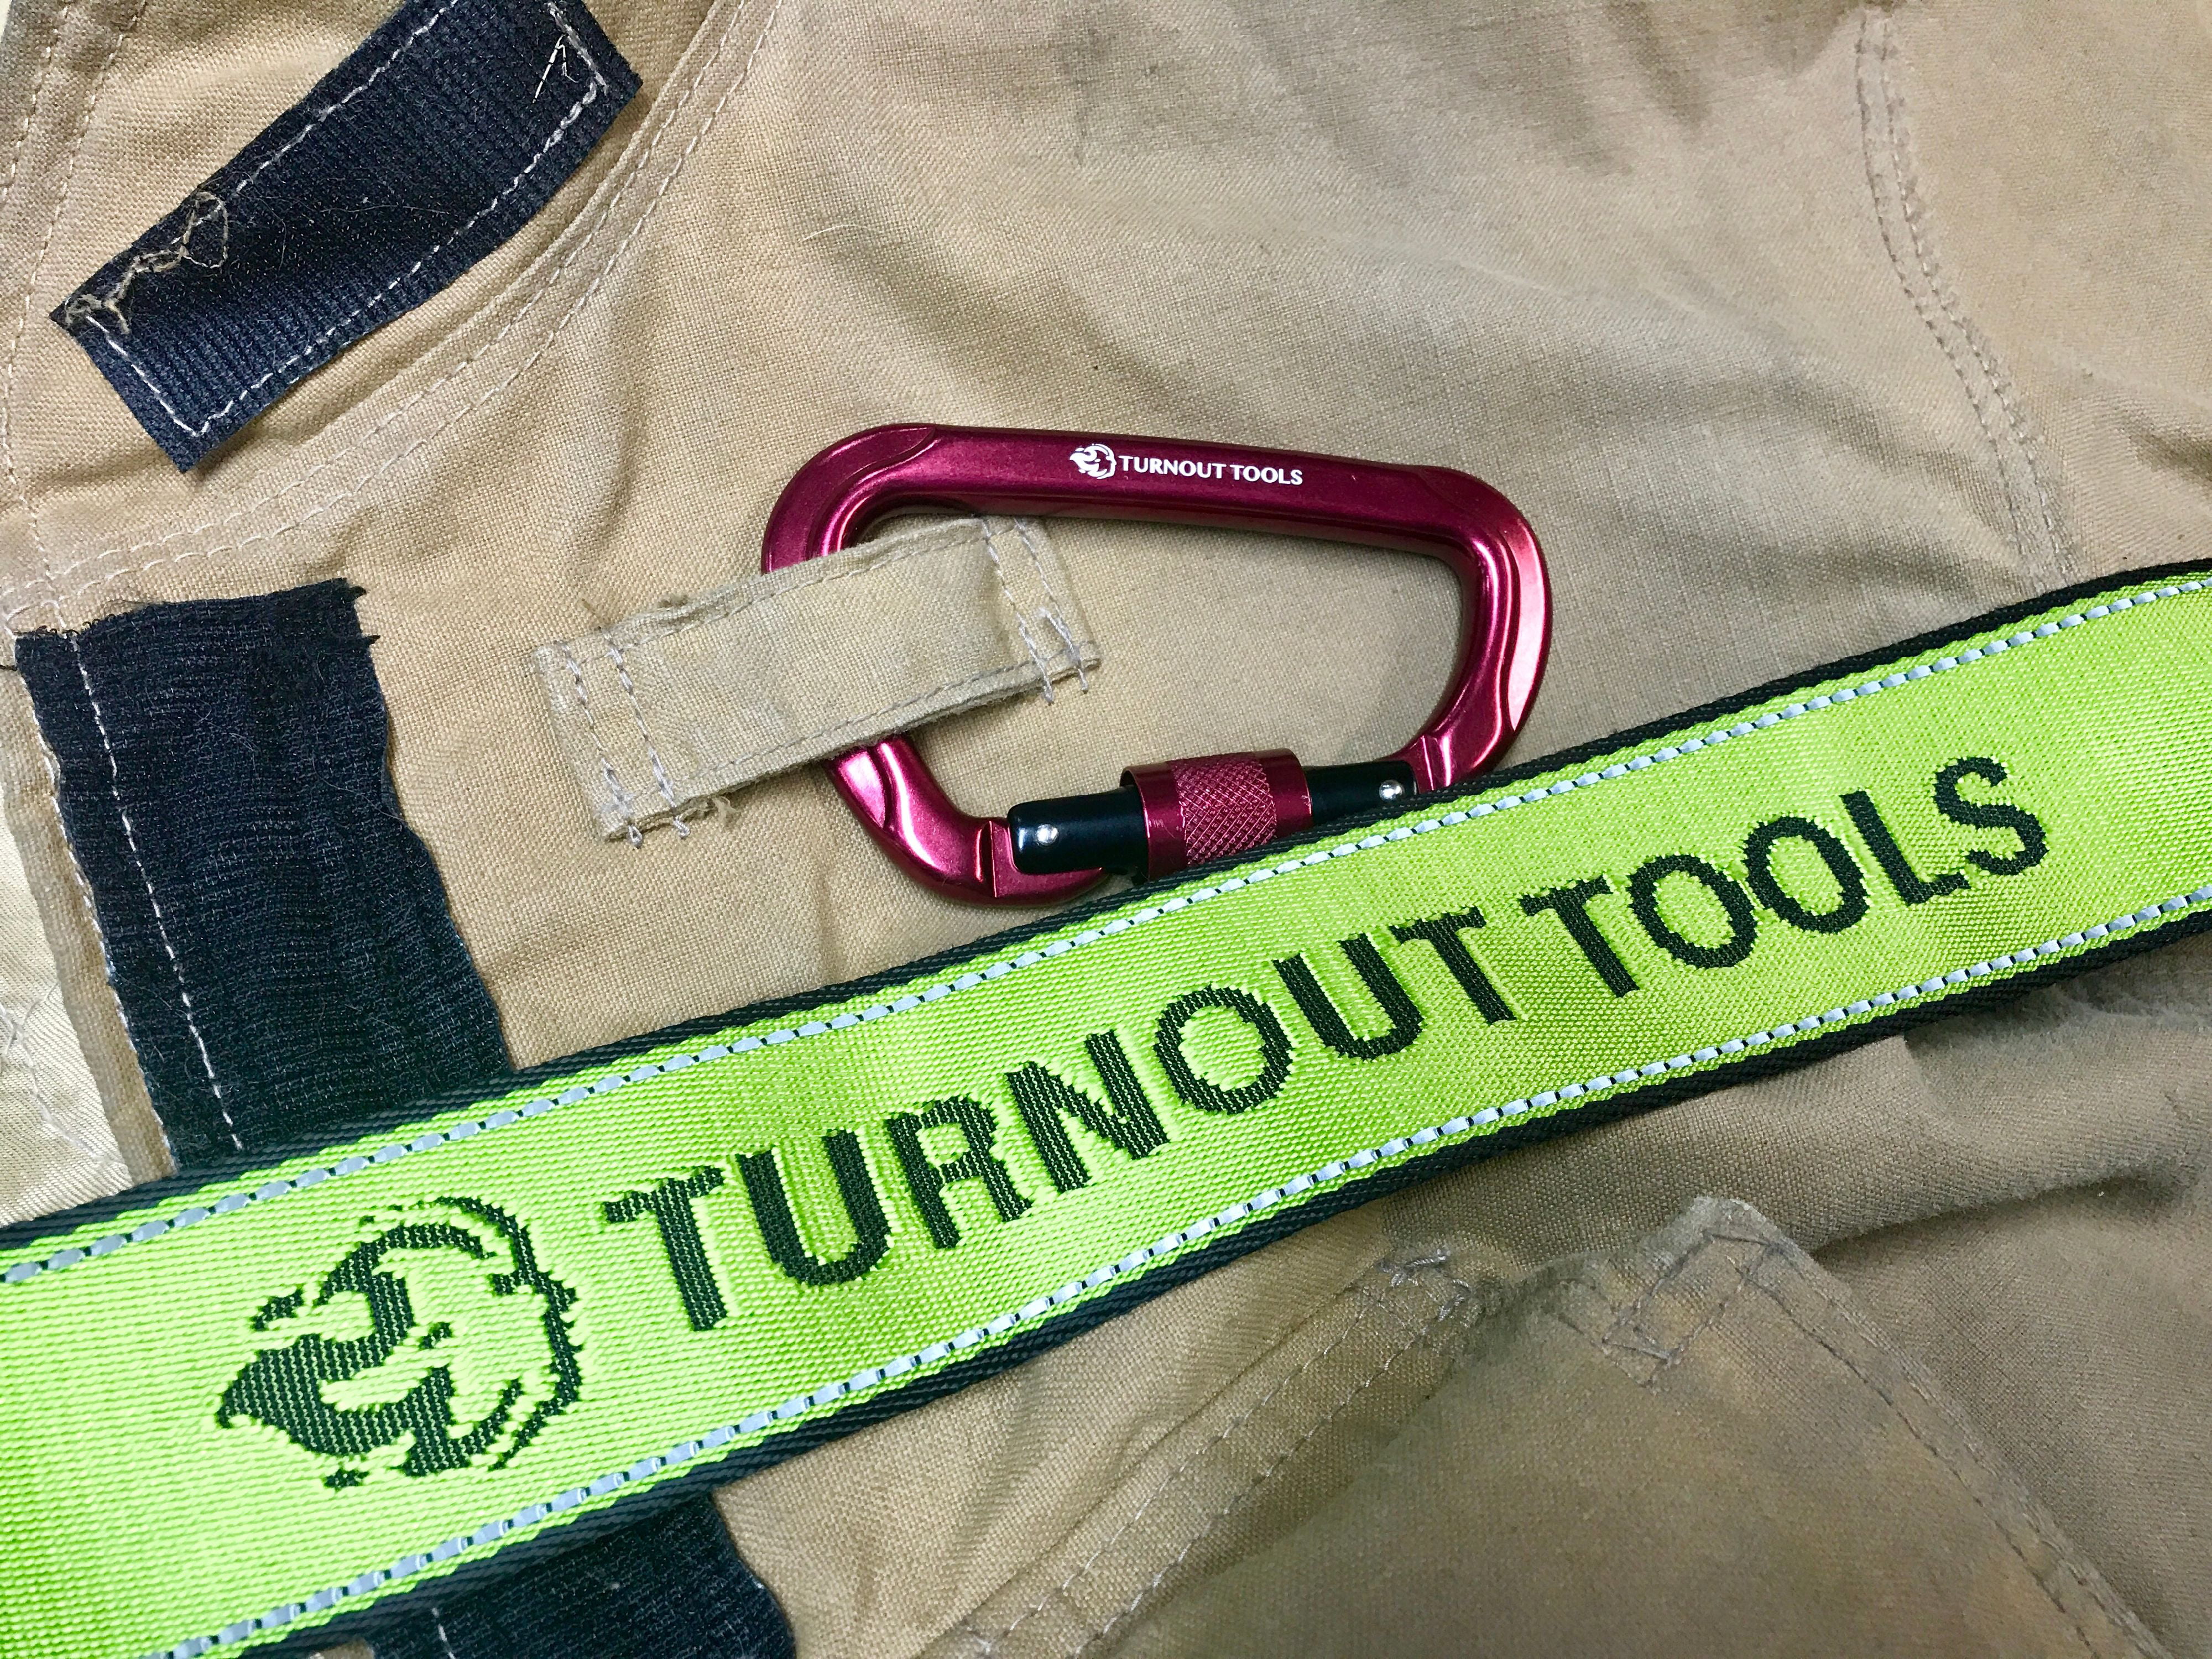 NFPA 1983 & 2112 Turnout Tools Firefighter & Rescue Services Locking Carabiner